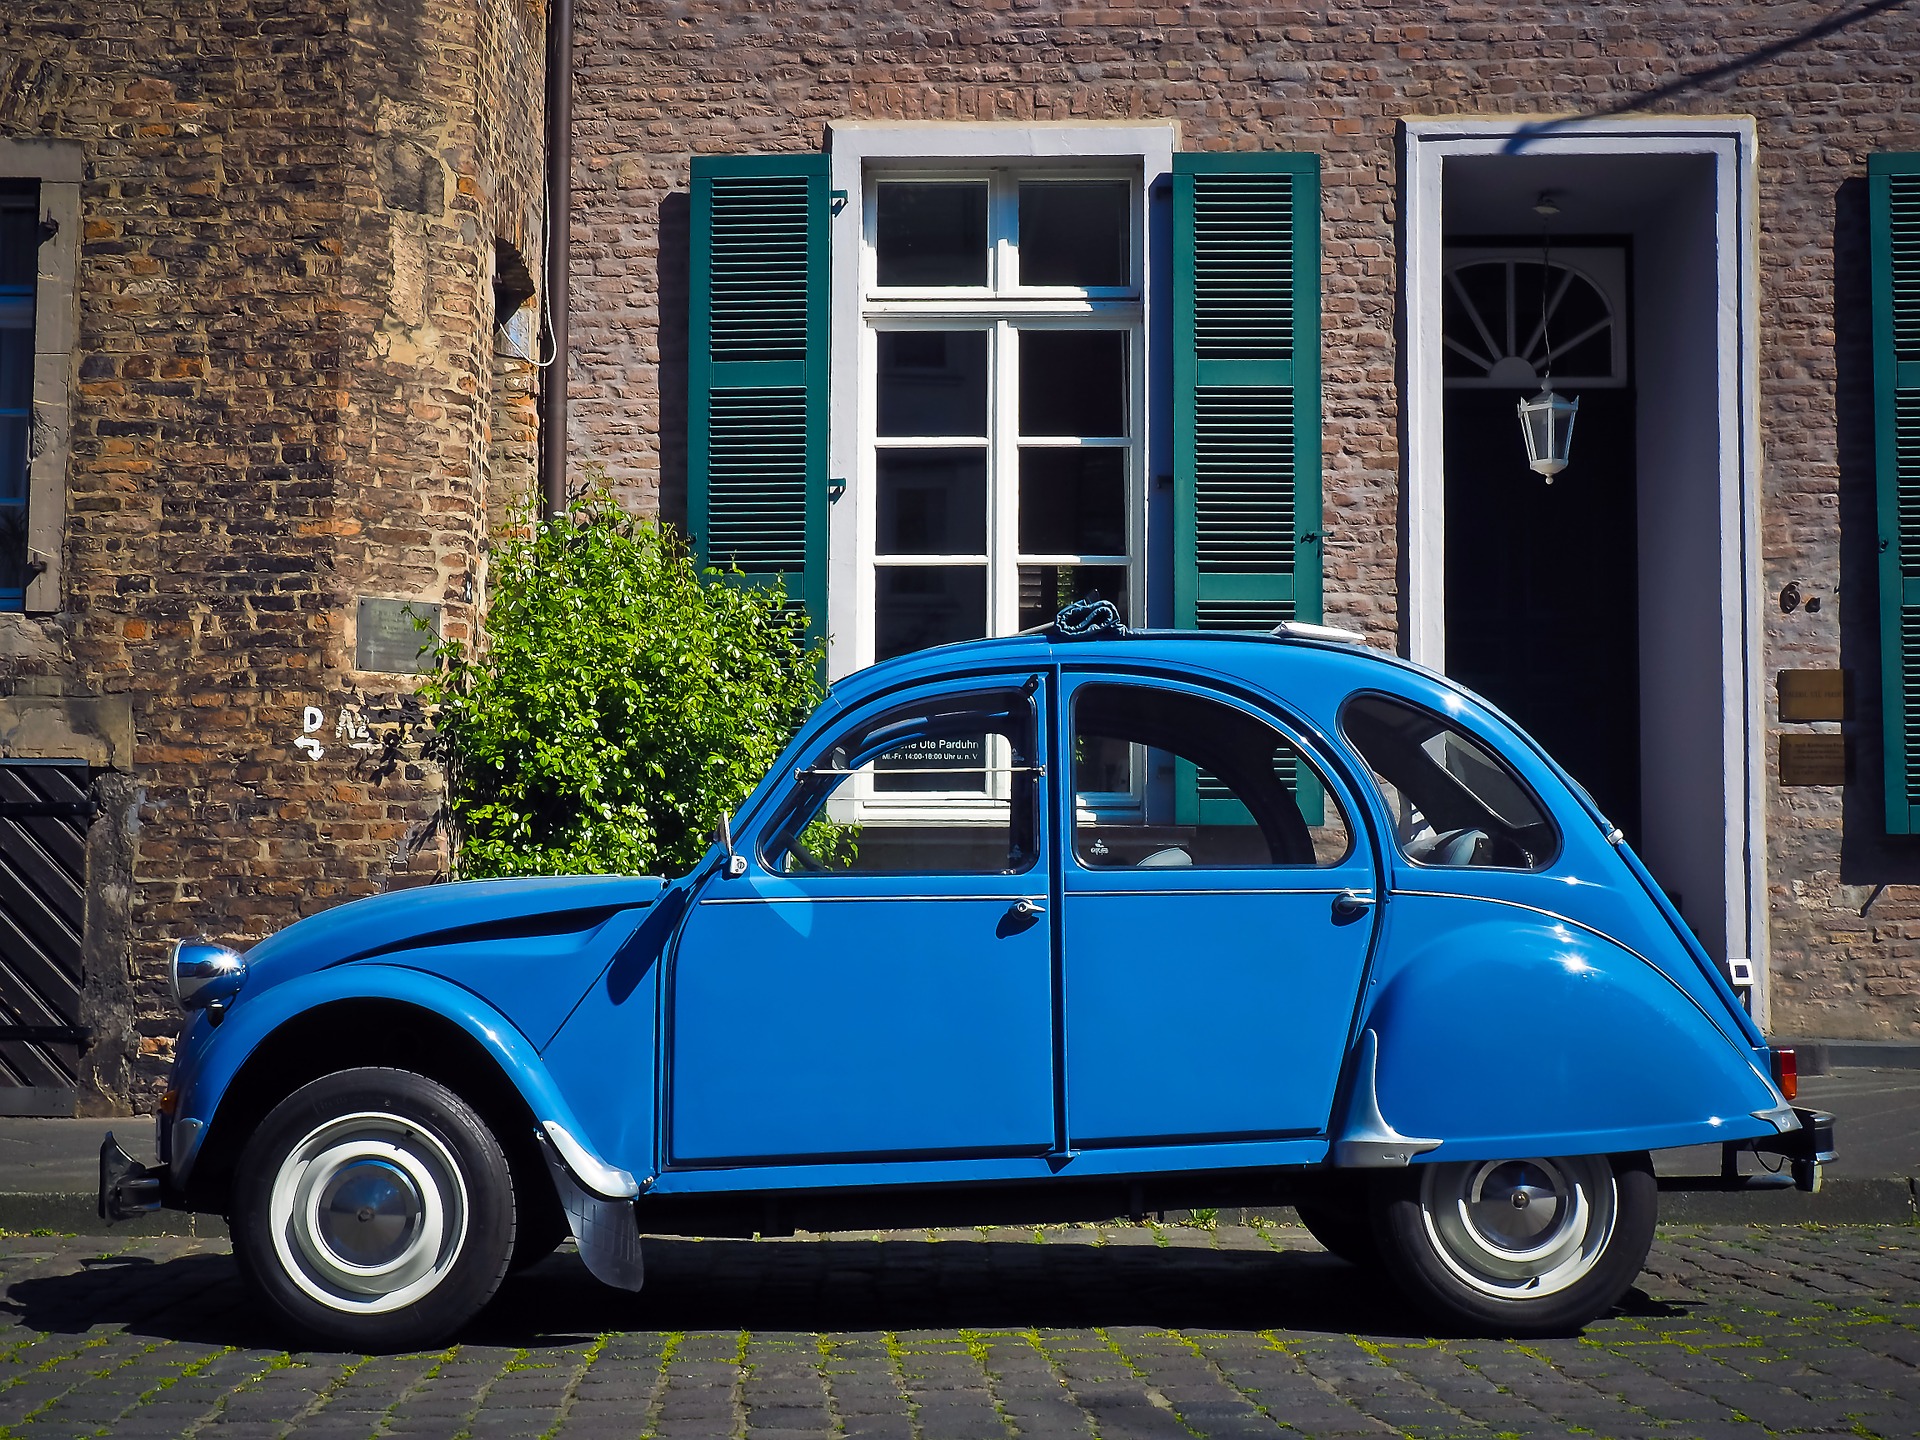 Our prize winner sells Classic 2CV car parts